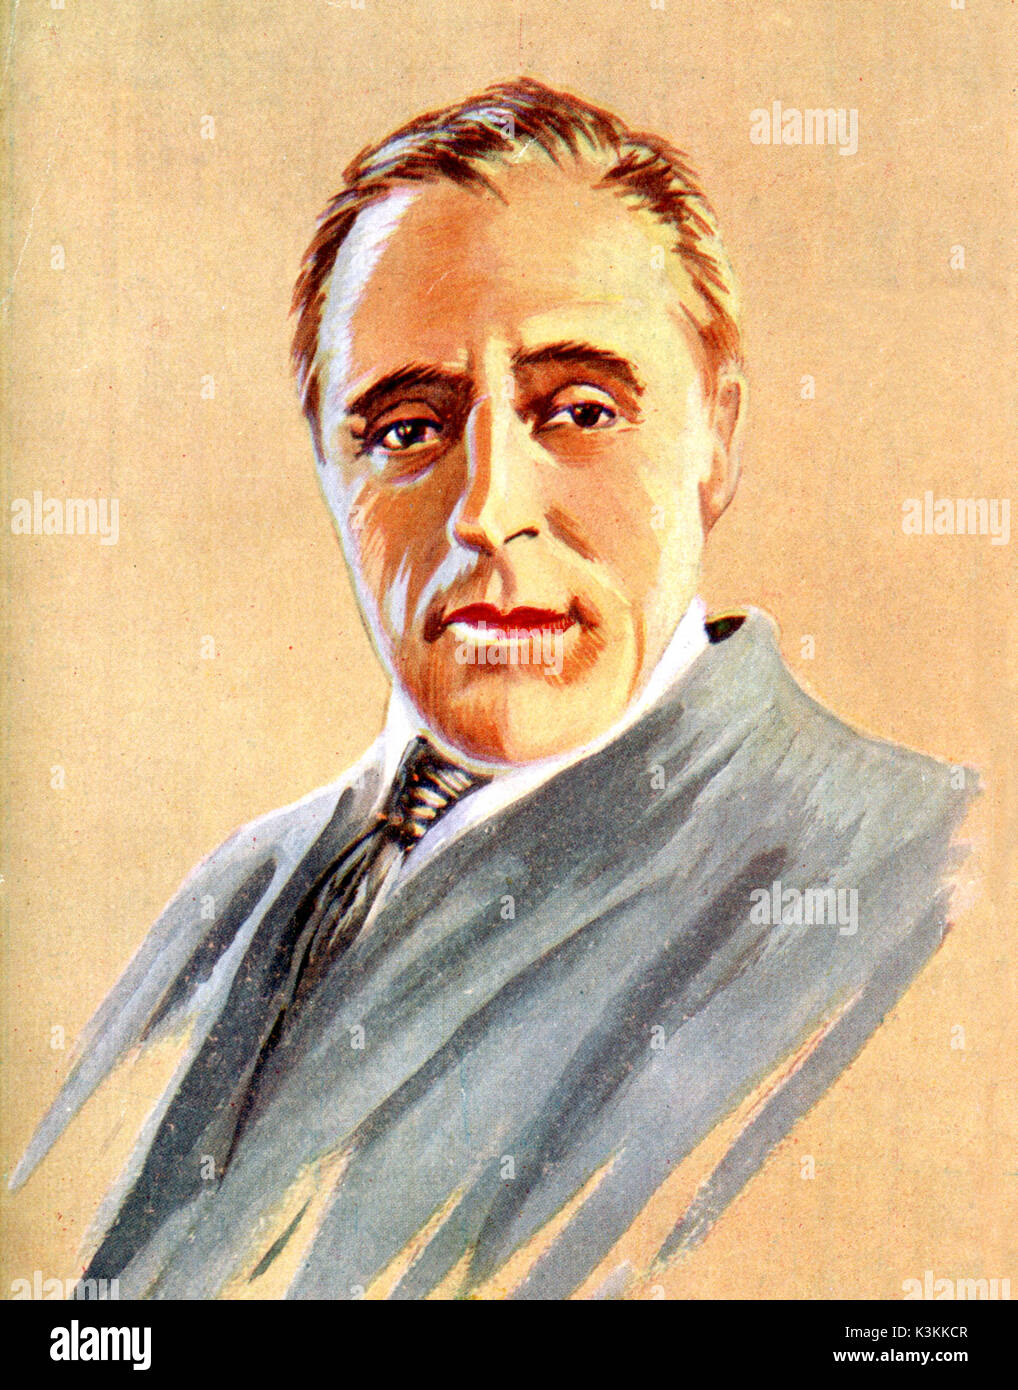 D.W. GRIFFITH Film director Stock Photo